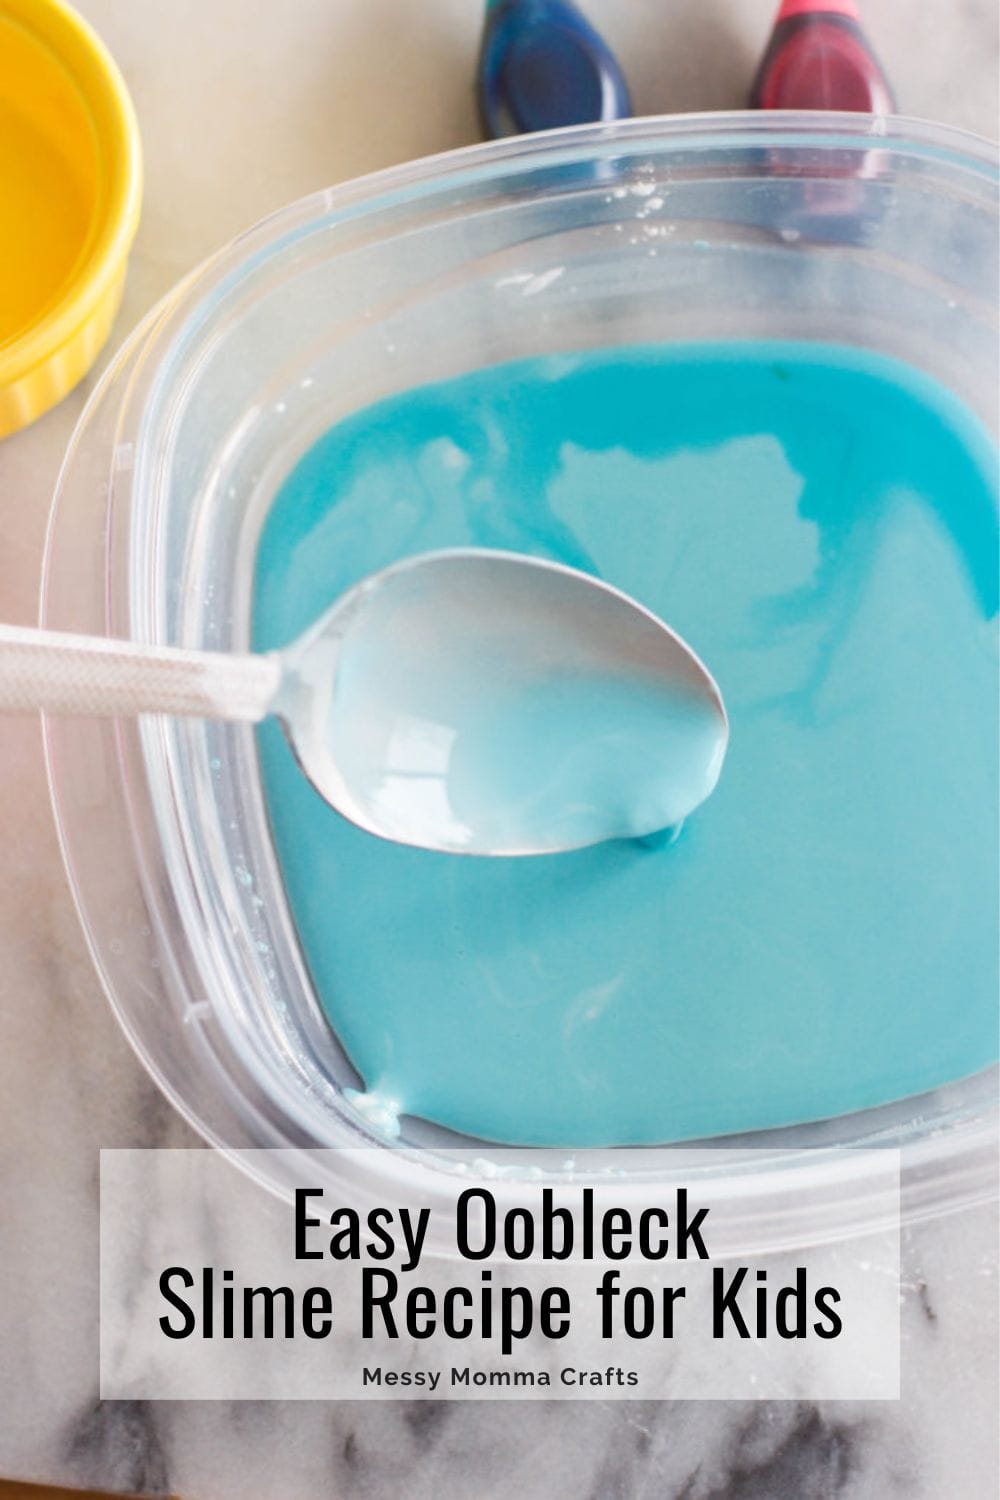 Easy blue oobleck slime recipe for kids in a tub.